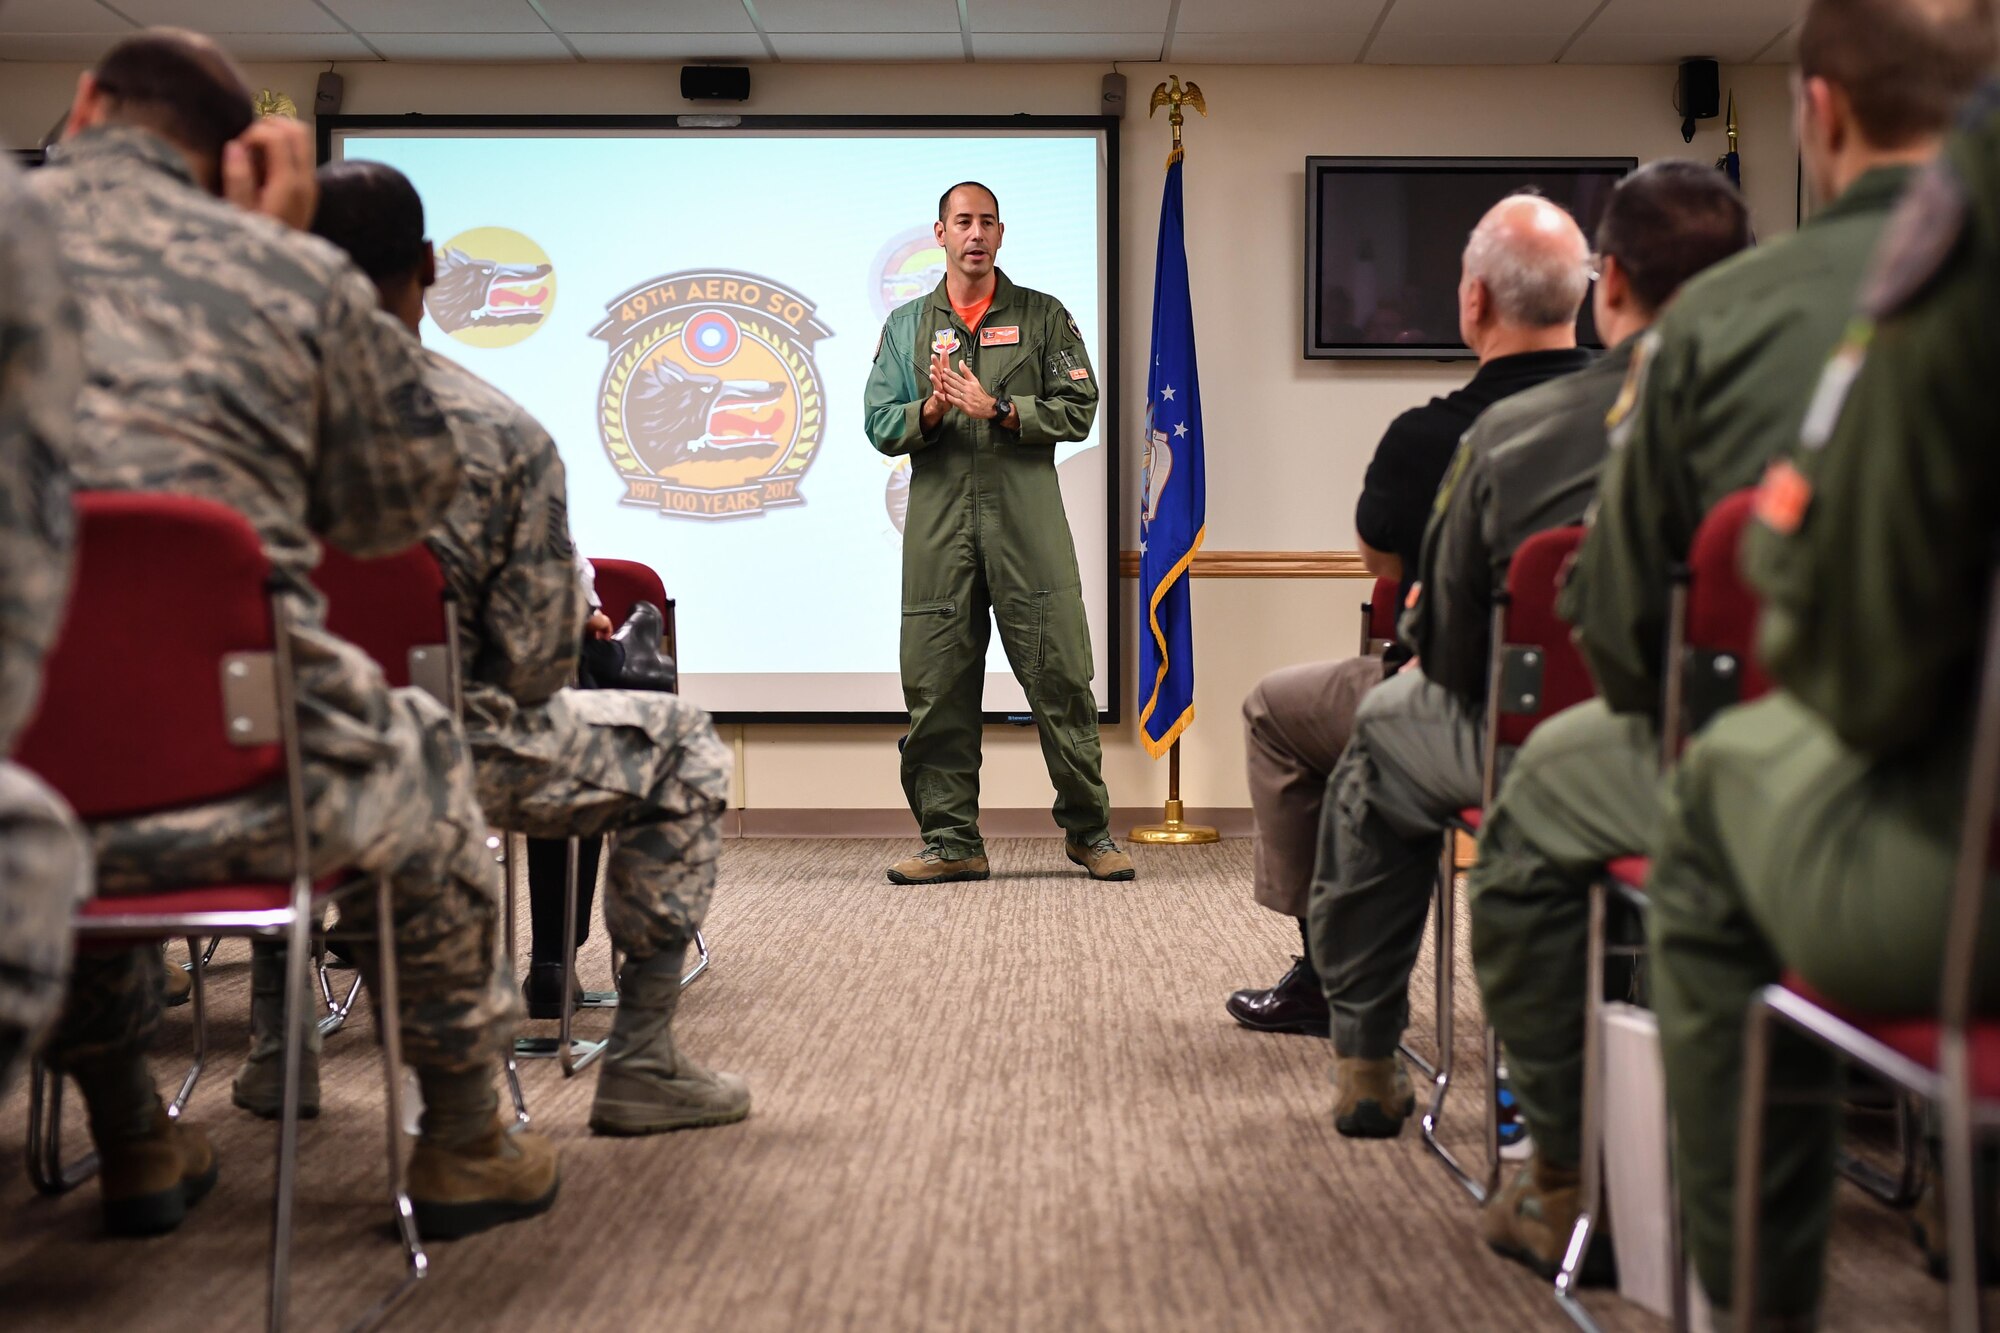 Lt. Col. Joseph McKenna, 49th Test and Evaluation Squadron commander, speaks to guests during a ceremony at Barksdale Air Force Base, La., Aug. 2, 2017. The ceremony was held to celebrate the 100th birthday of the 49th TES, and to provide a historical overview of the unit’s missions and accomplishments over the century. (U.S. Air Force Photo/Senior Airmen Mozer O. Da Cunha)